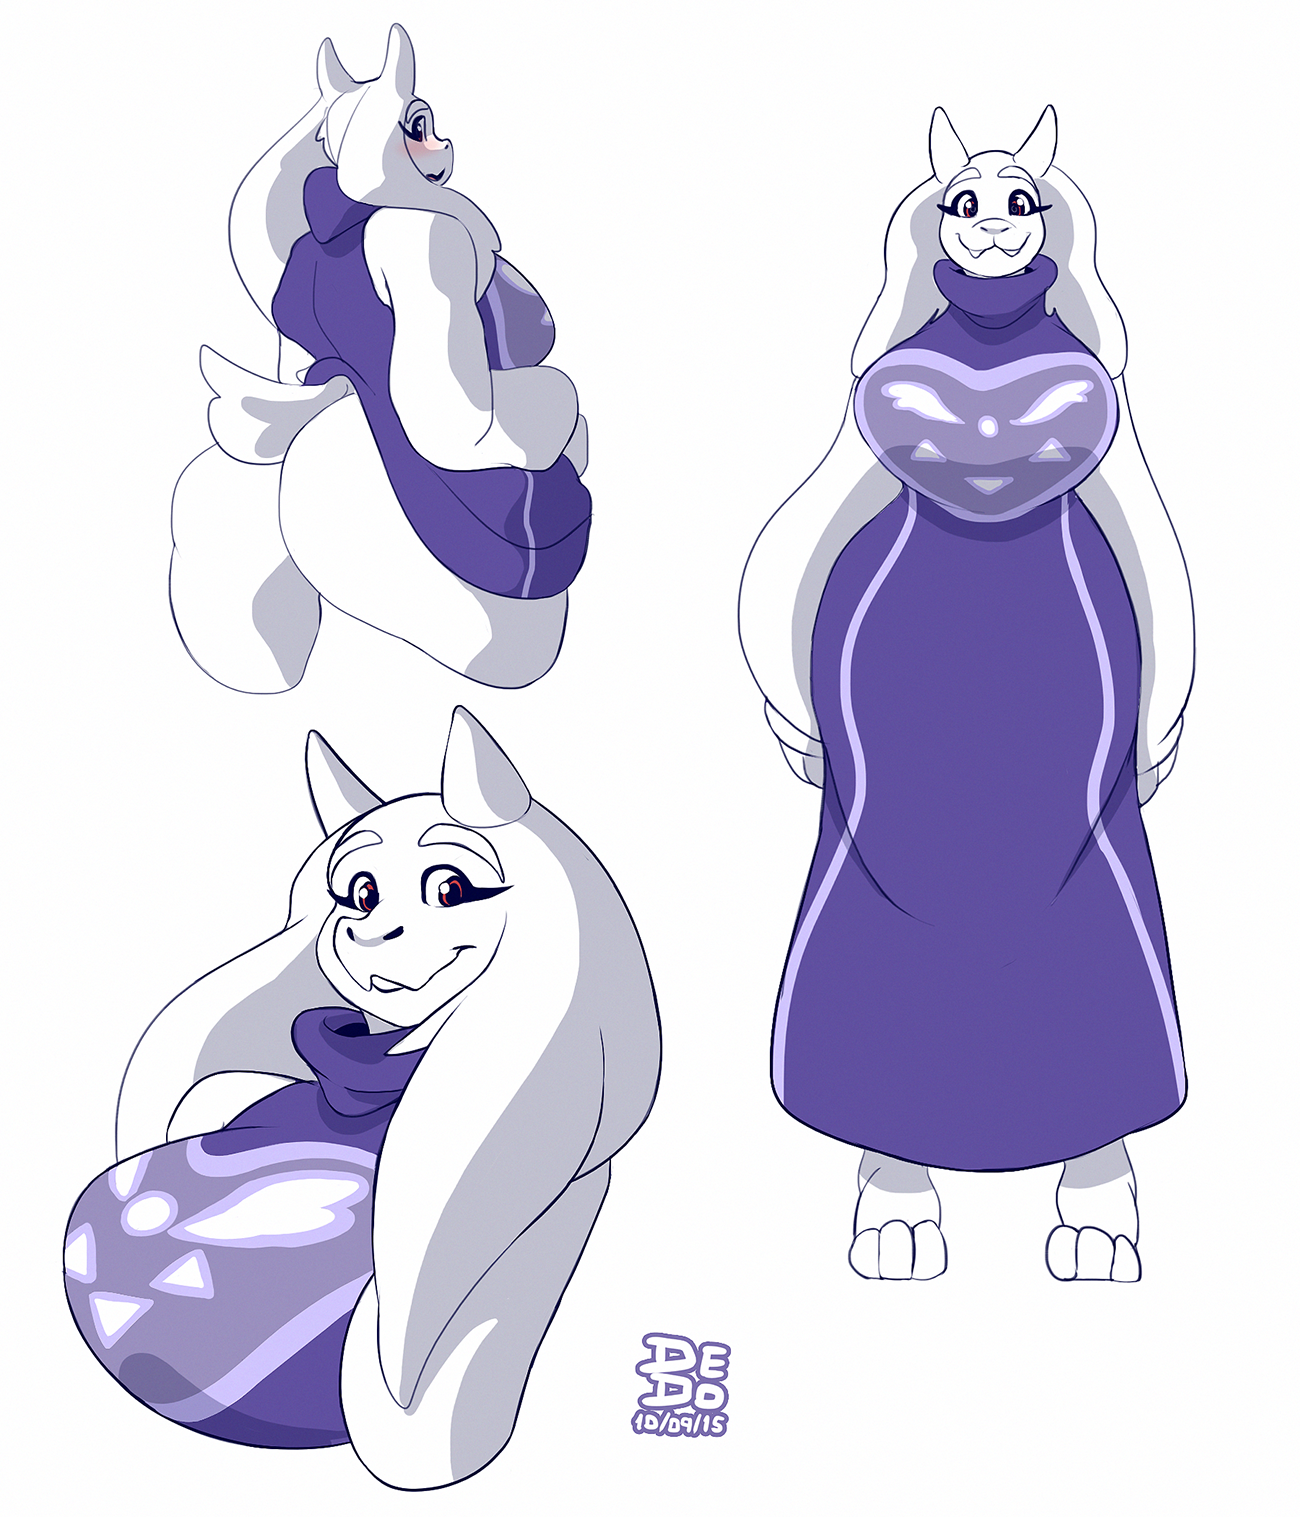 OC Character Thread 2 (This thread is now locked, please use the OC Character Thread 3 above) - Page 19 1444422345.lionalliance_toriel_goatmom